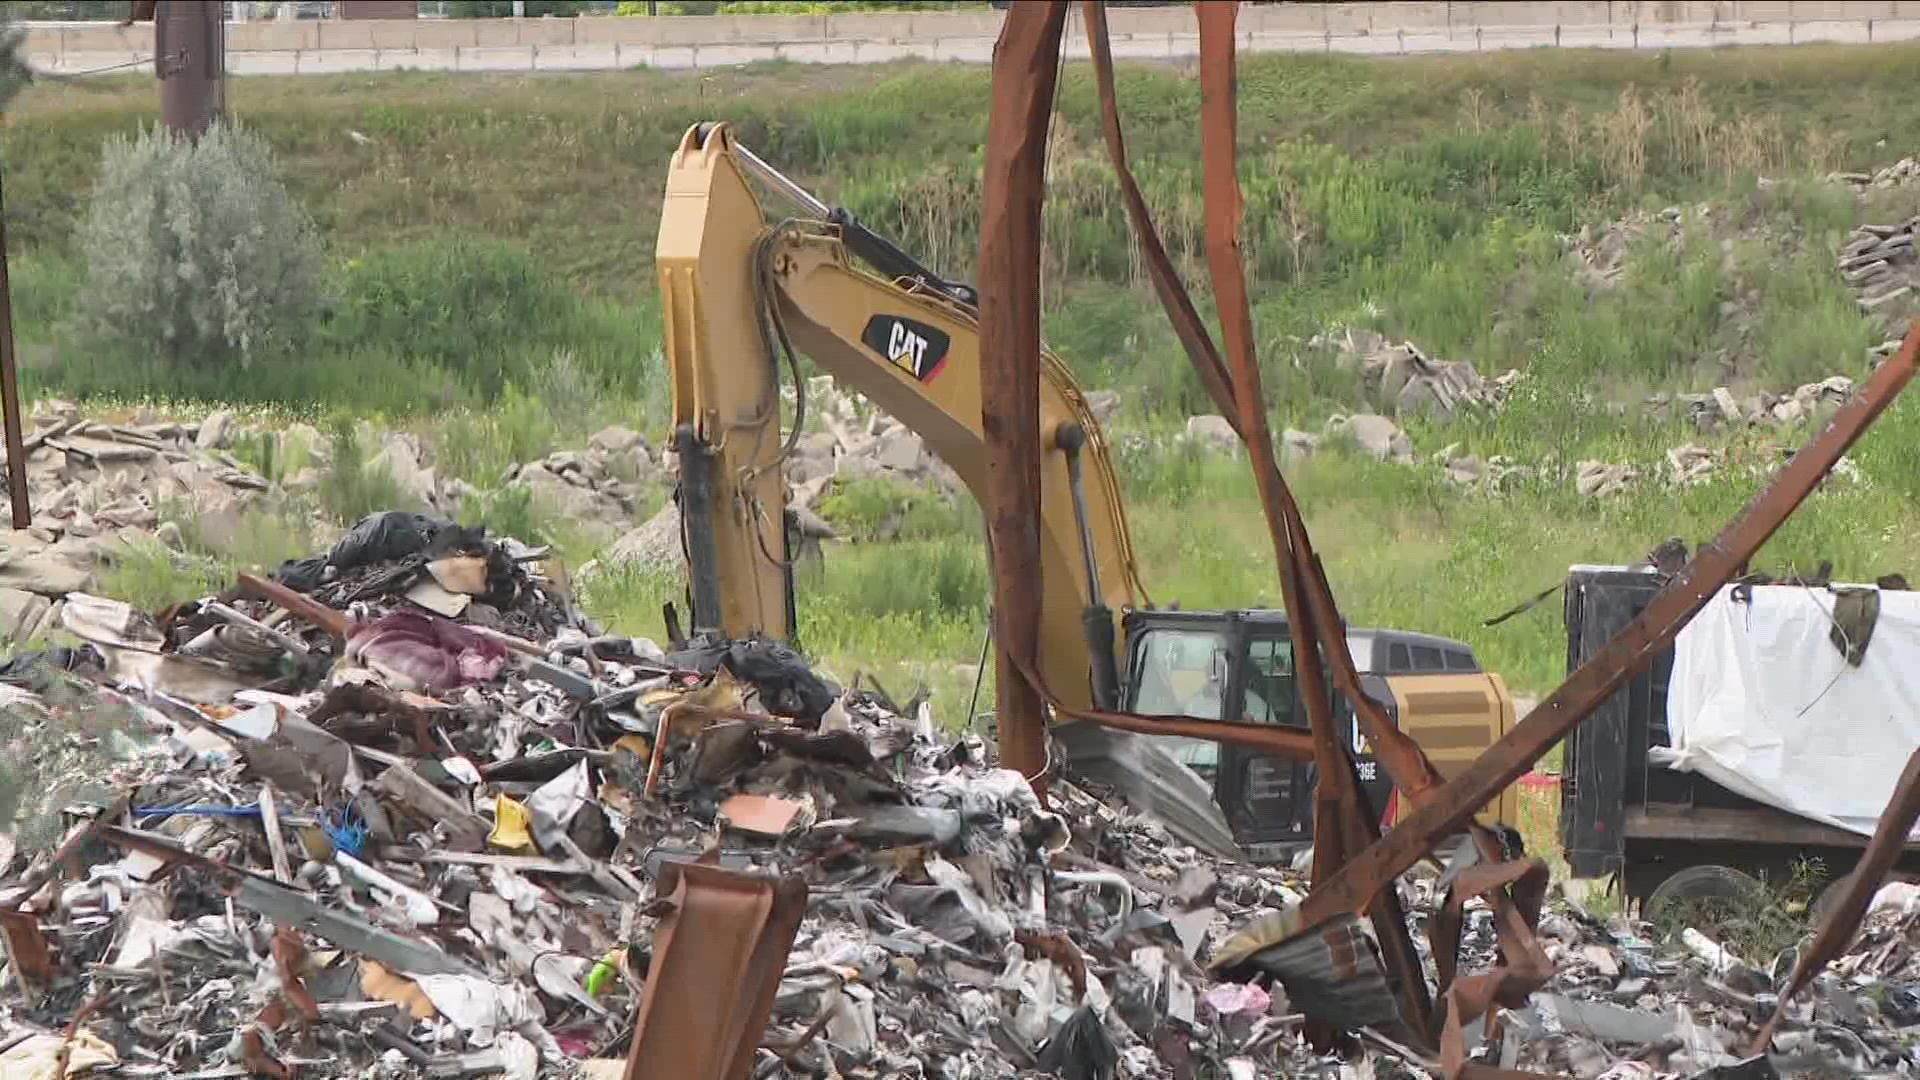 The city says the entire demolition process with take about two weeks. That includes removing about 40 truckloads of debris and eventually the metal structure.